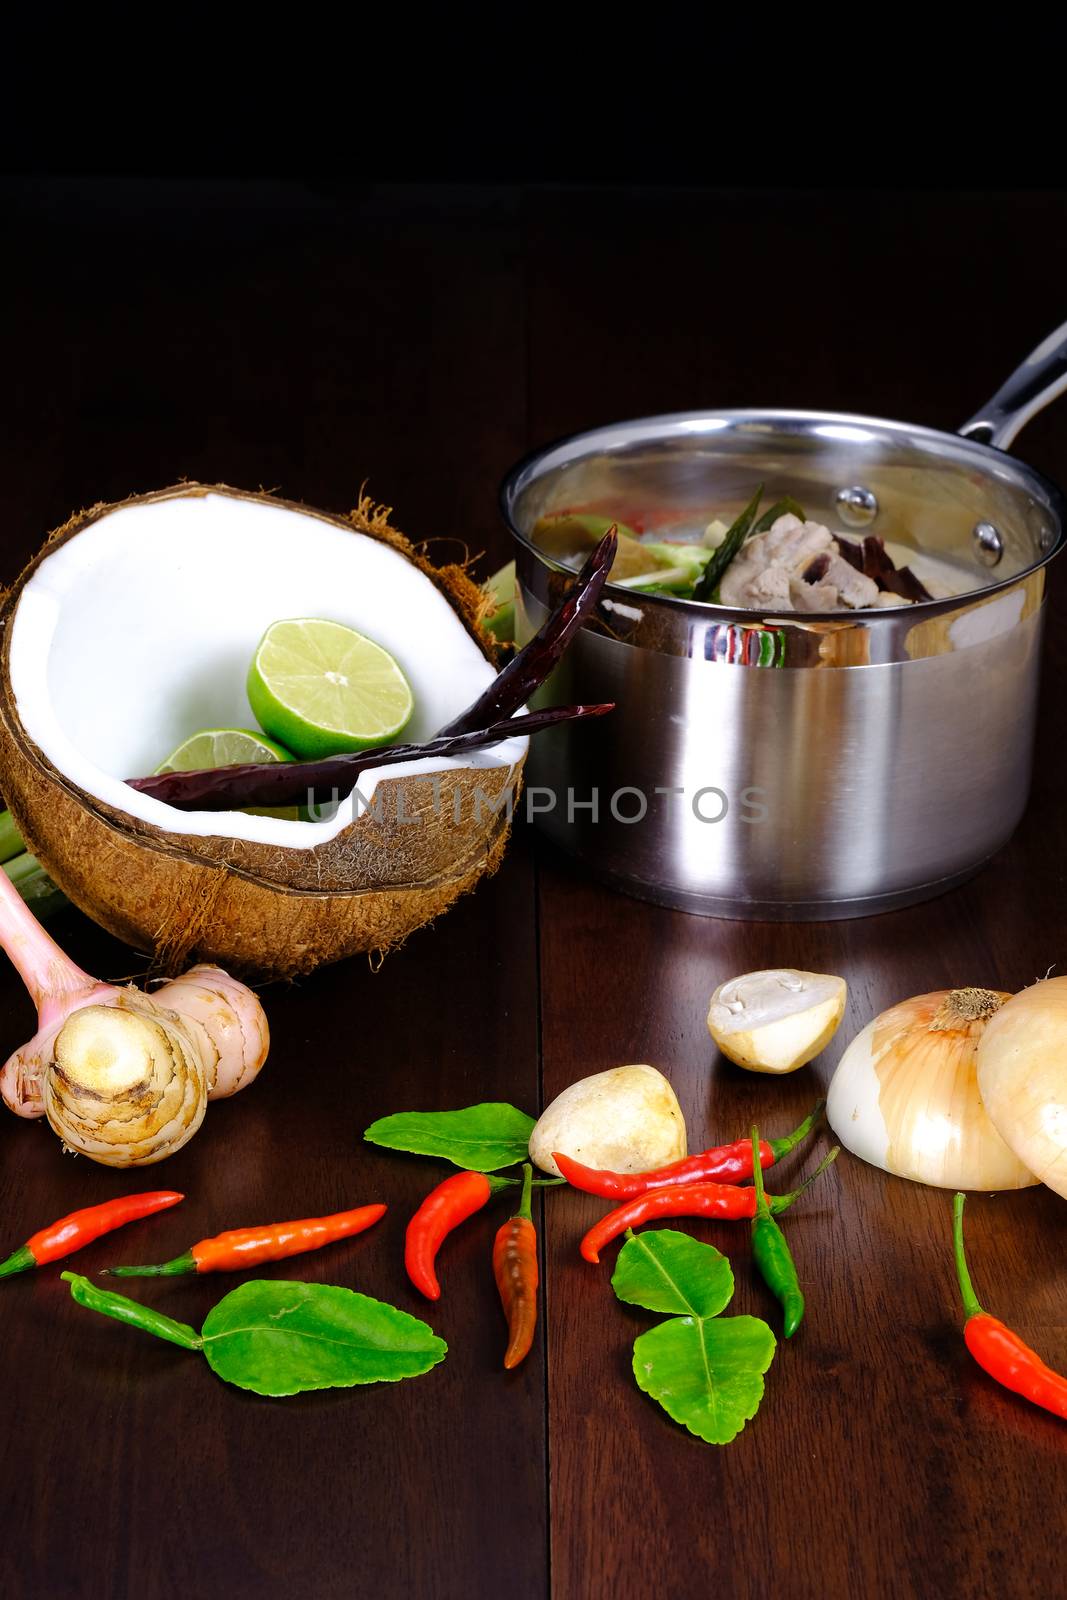 ingredients for preparing famous Thai Chicken Coconut Soup
(Tom Kha Gai) ' include coconut milk, shallot, galangal, lemon grass, red chilies, kaffir lime leaves, boneless chicken breast, lime juice